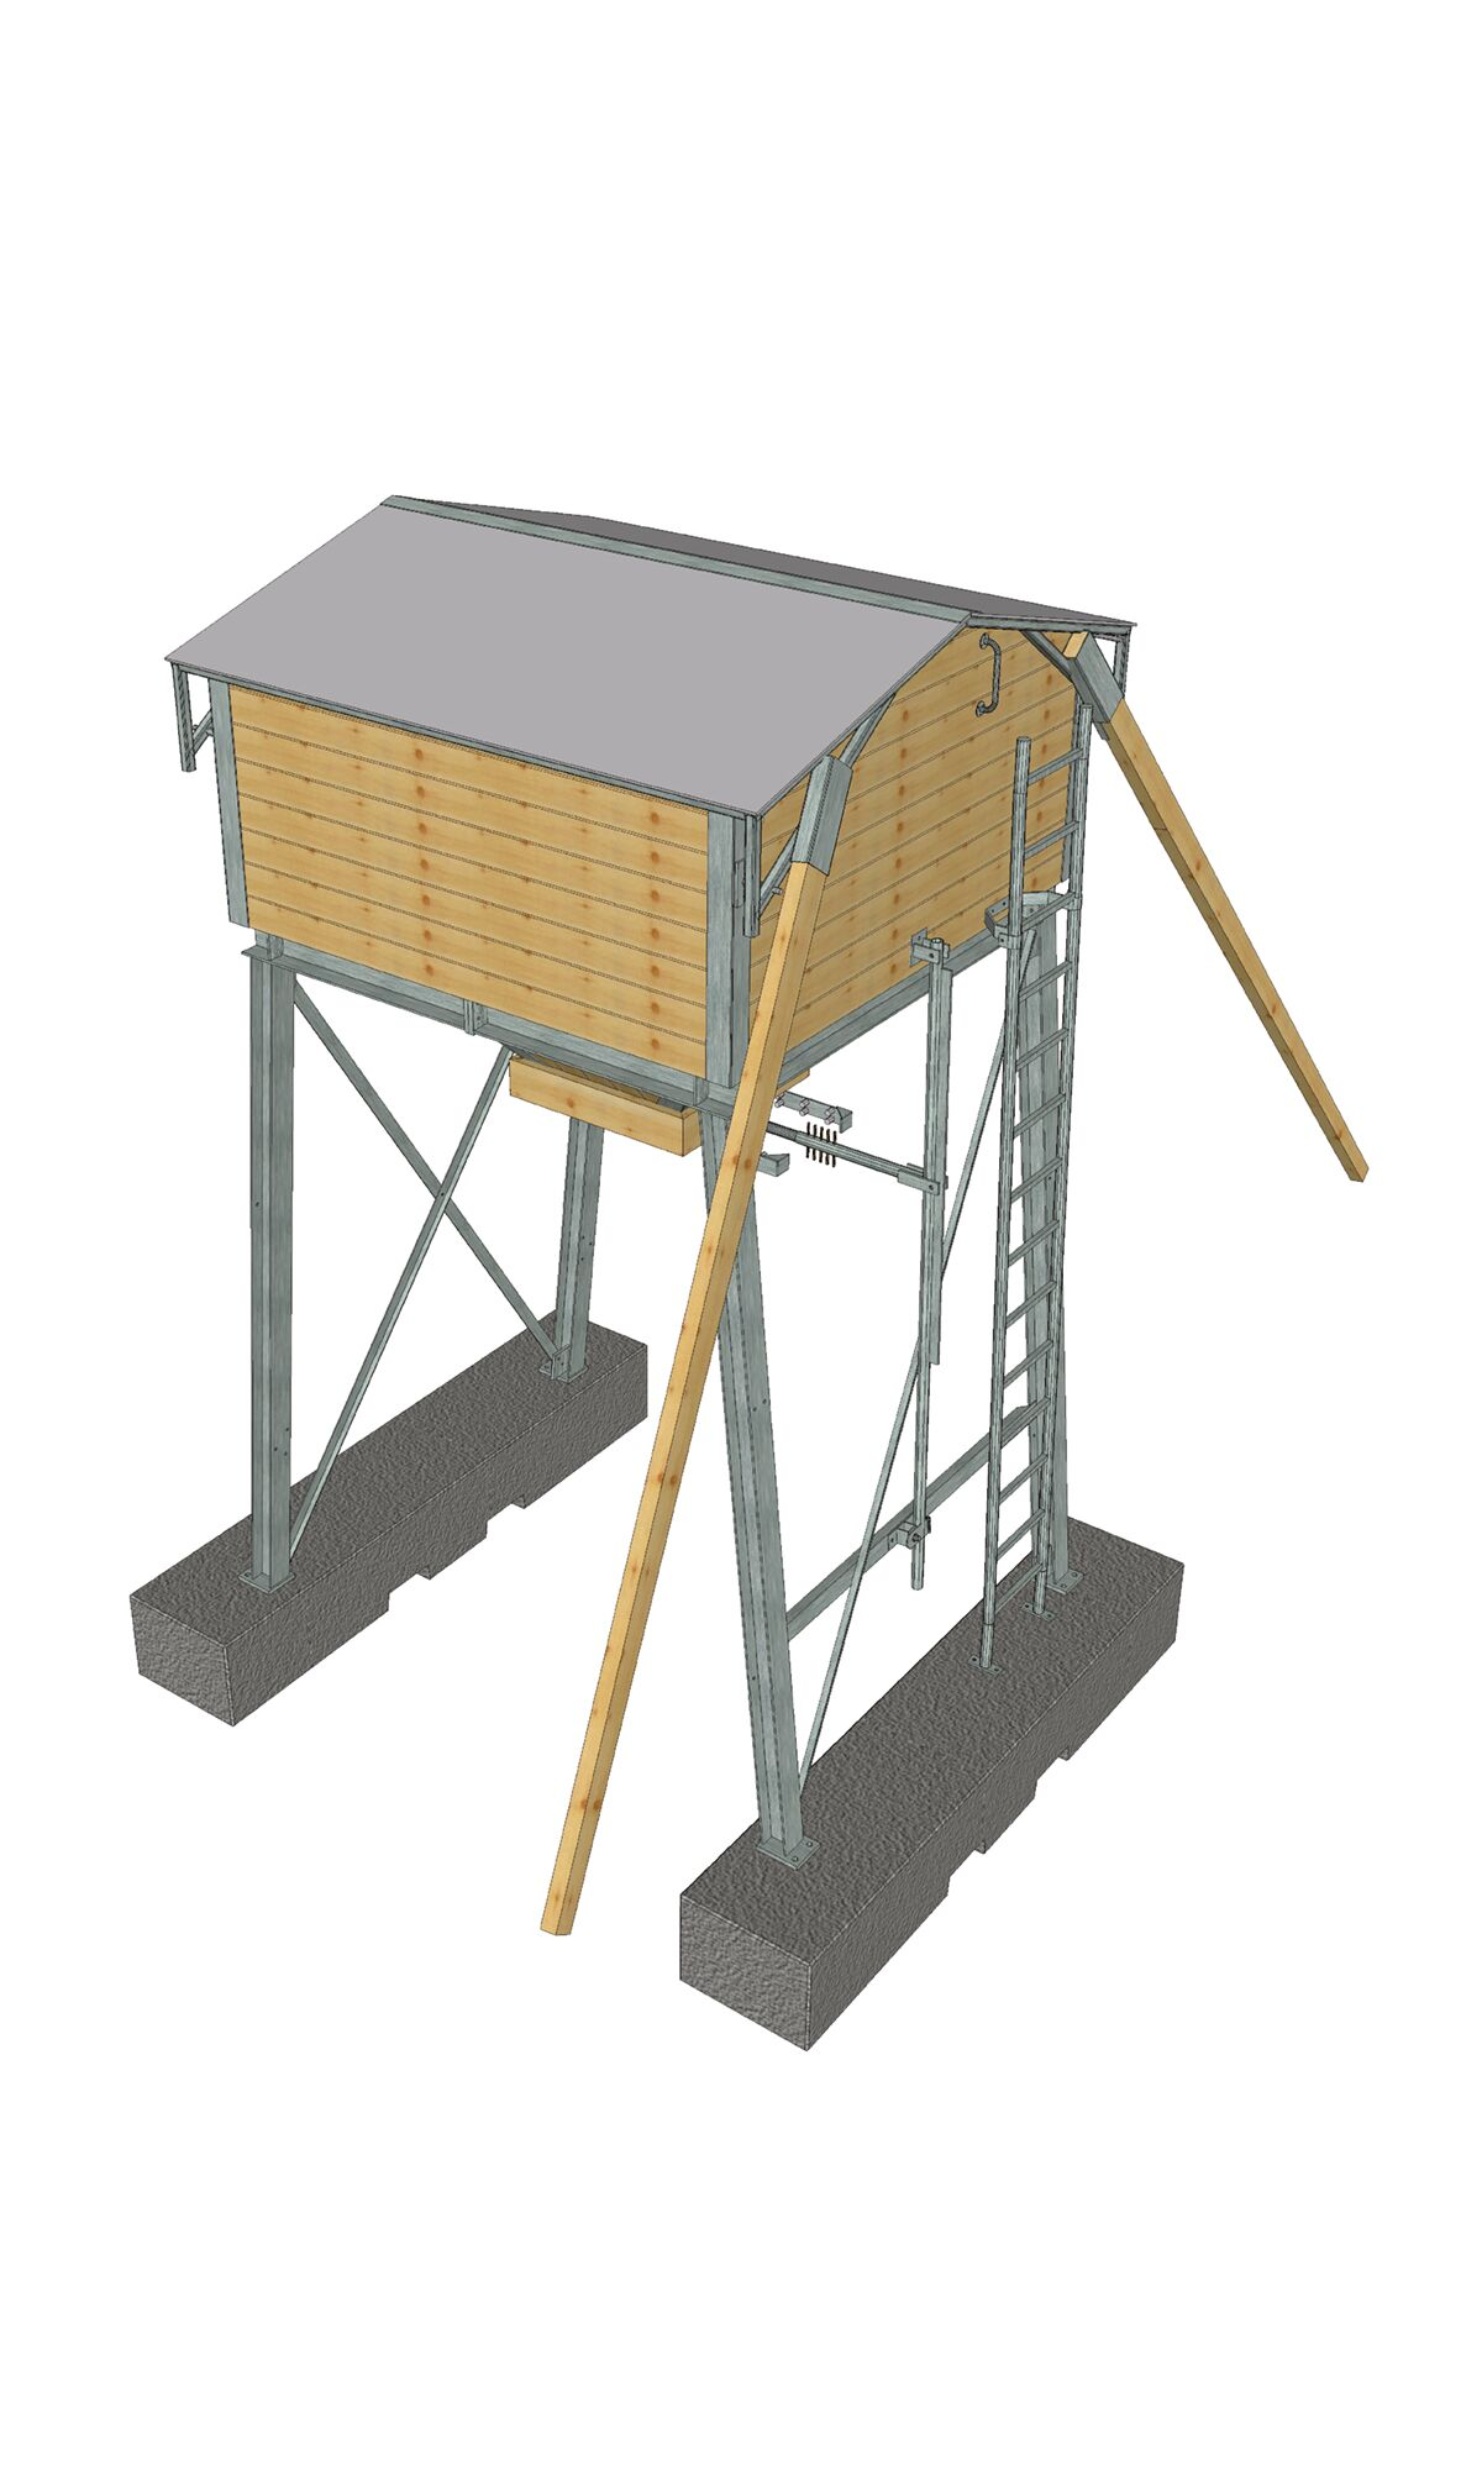 Small silo with folding roof made of wood by Blumer Lehmann